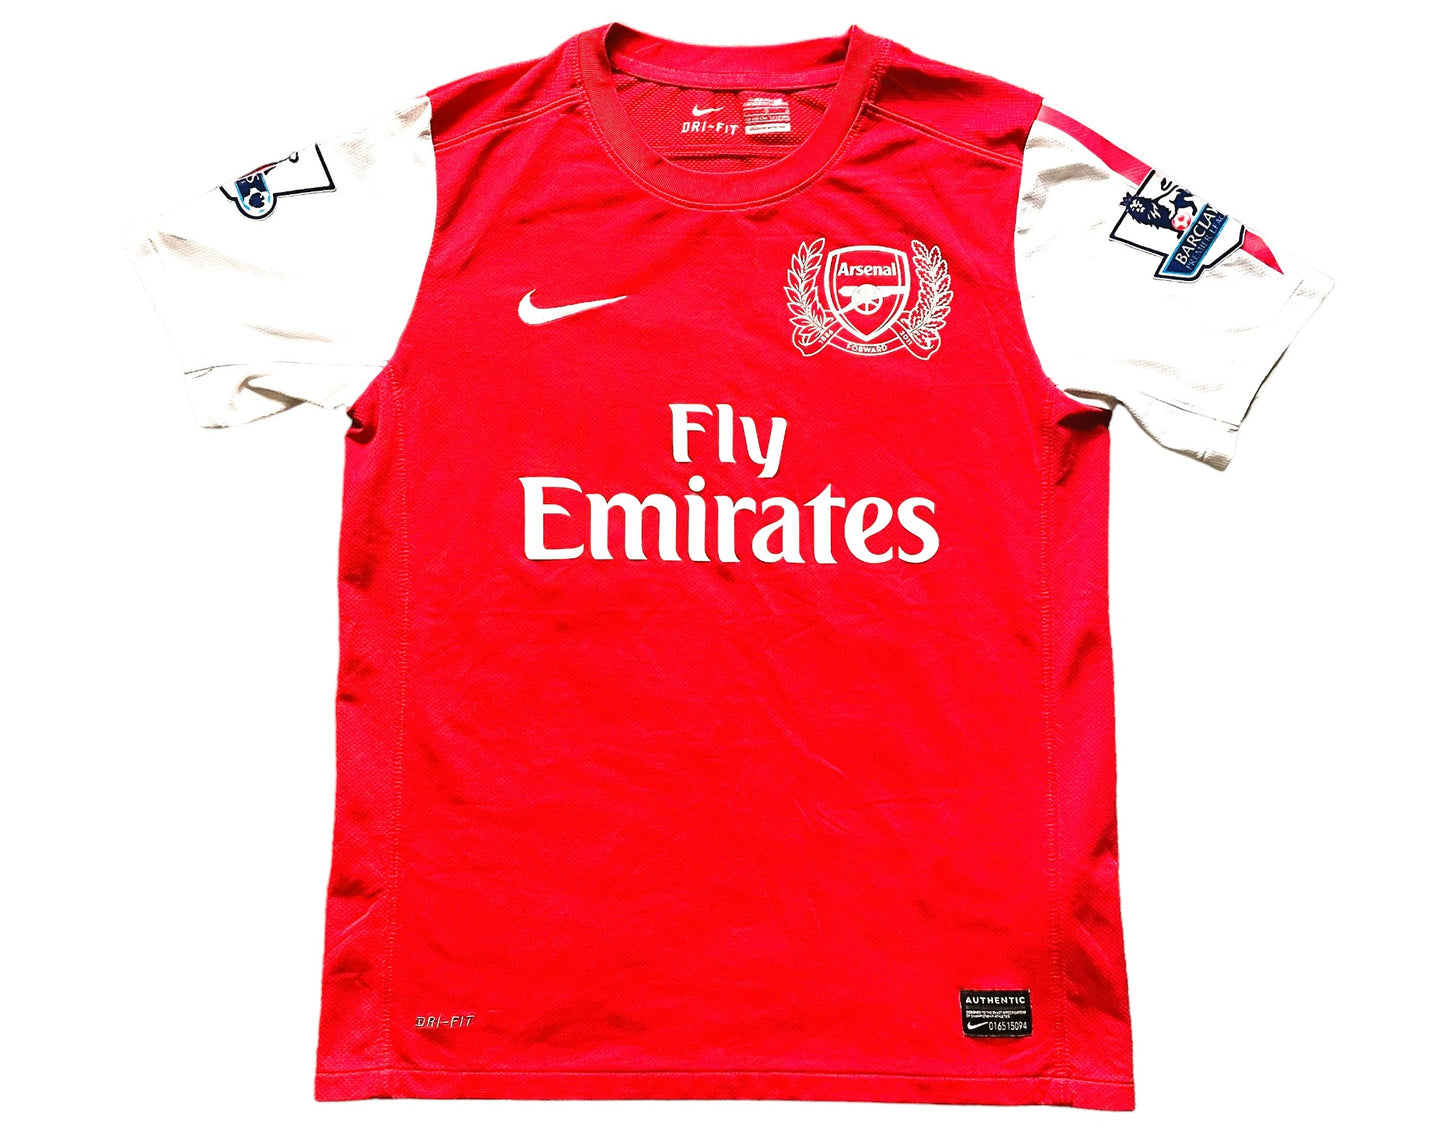 Arsenal 2011 Home Shirt V.PERSIE 10 (very good) AdultsXS /Youths see below.